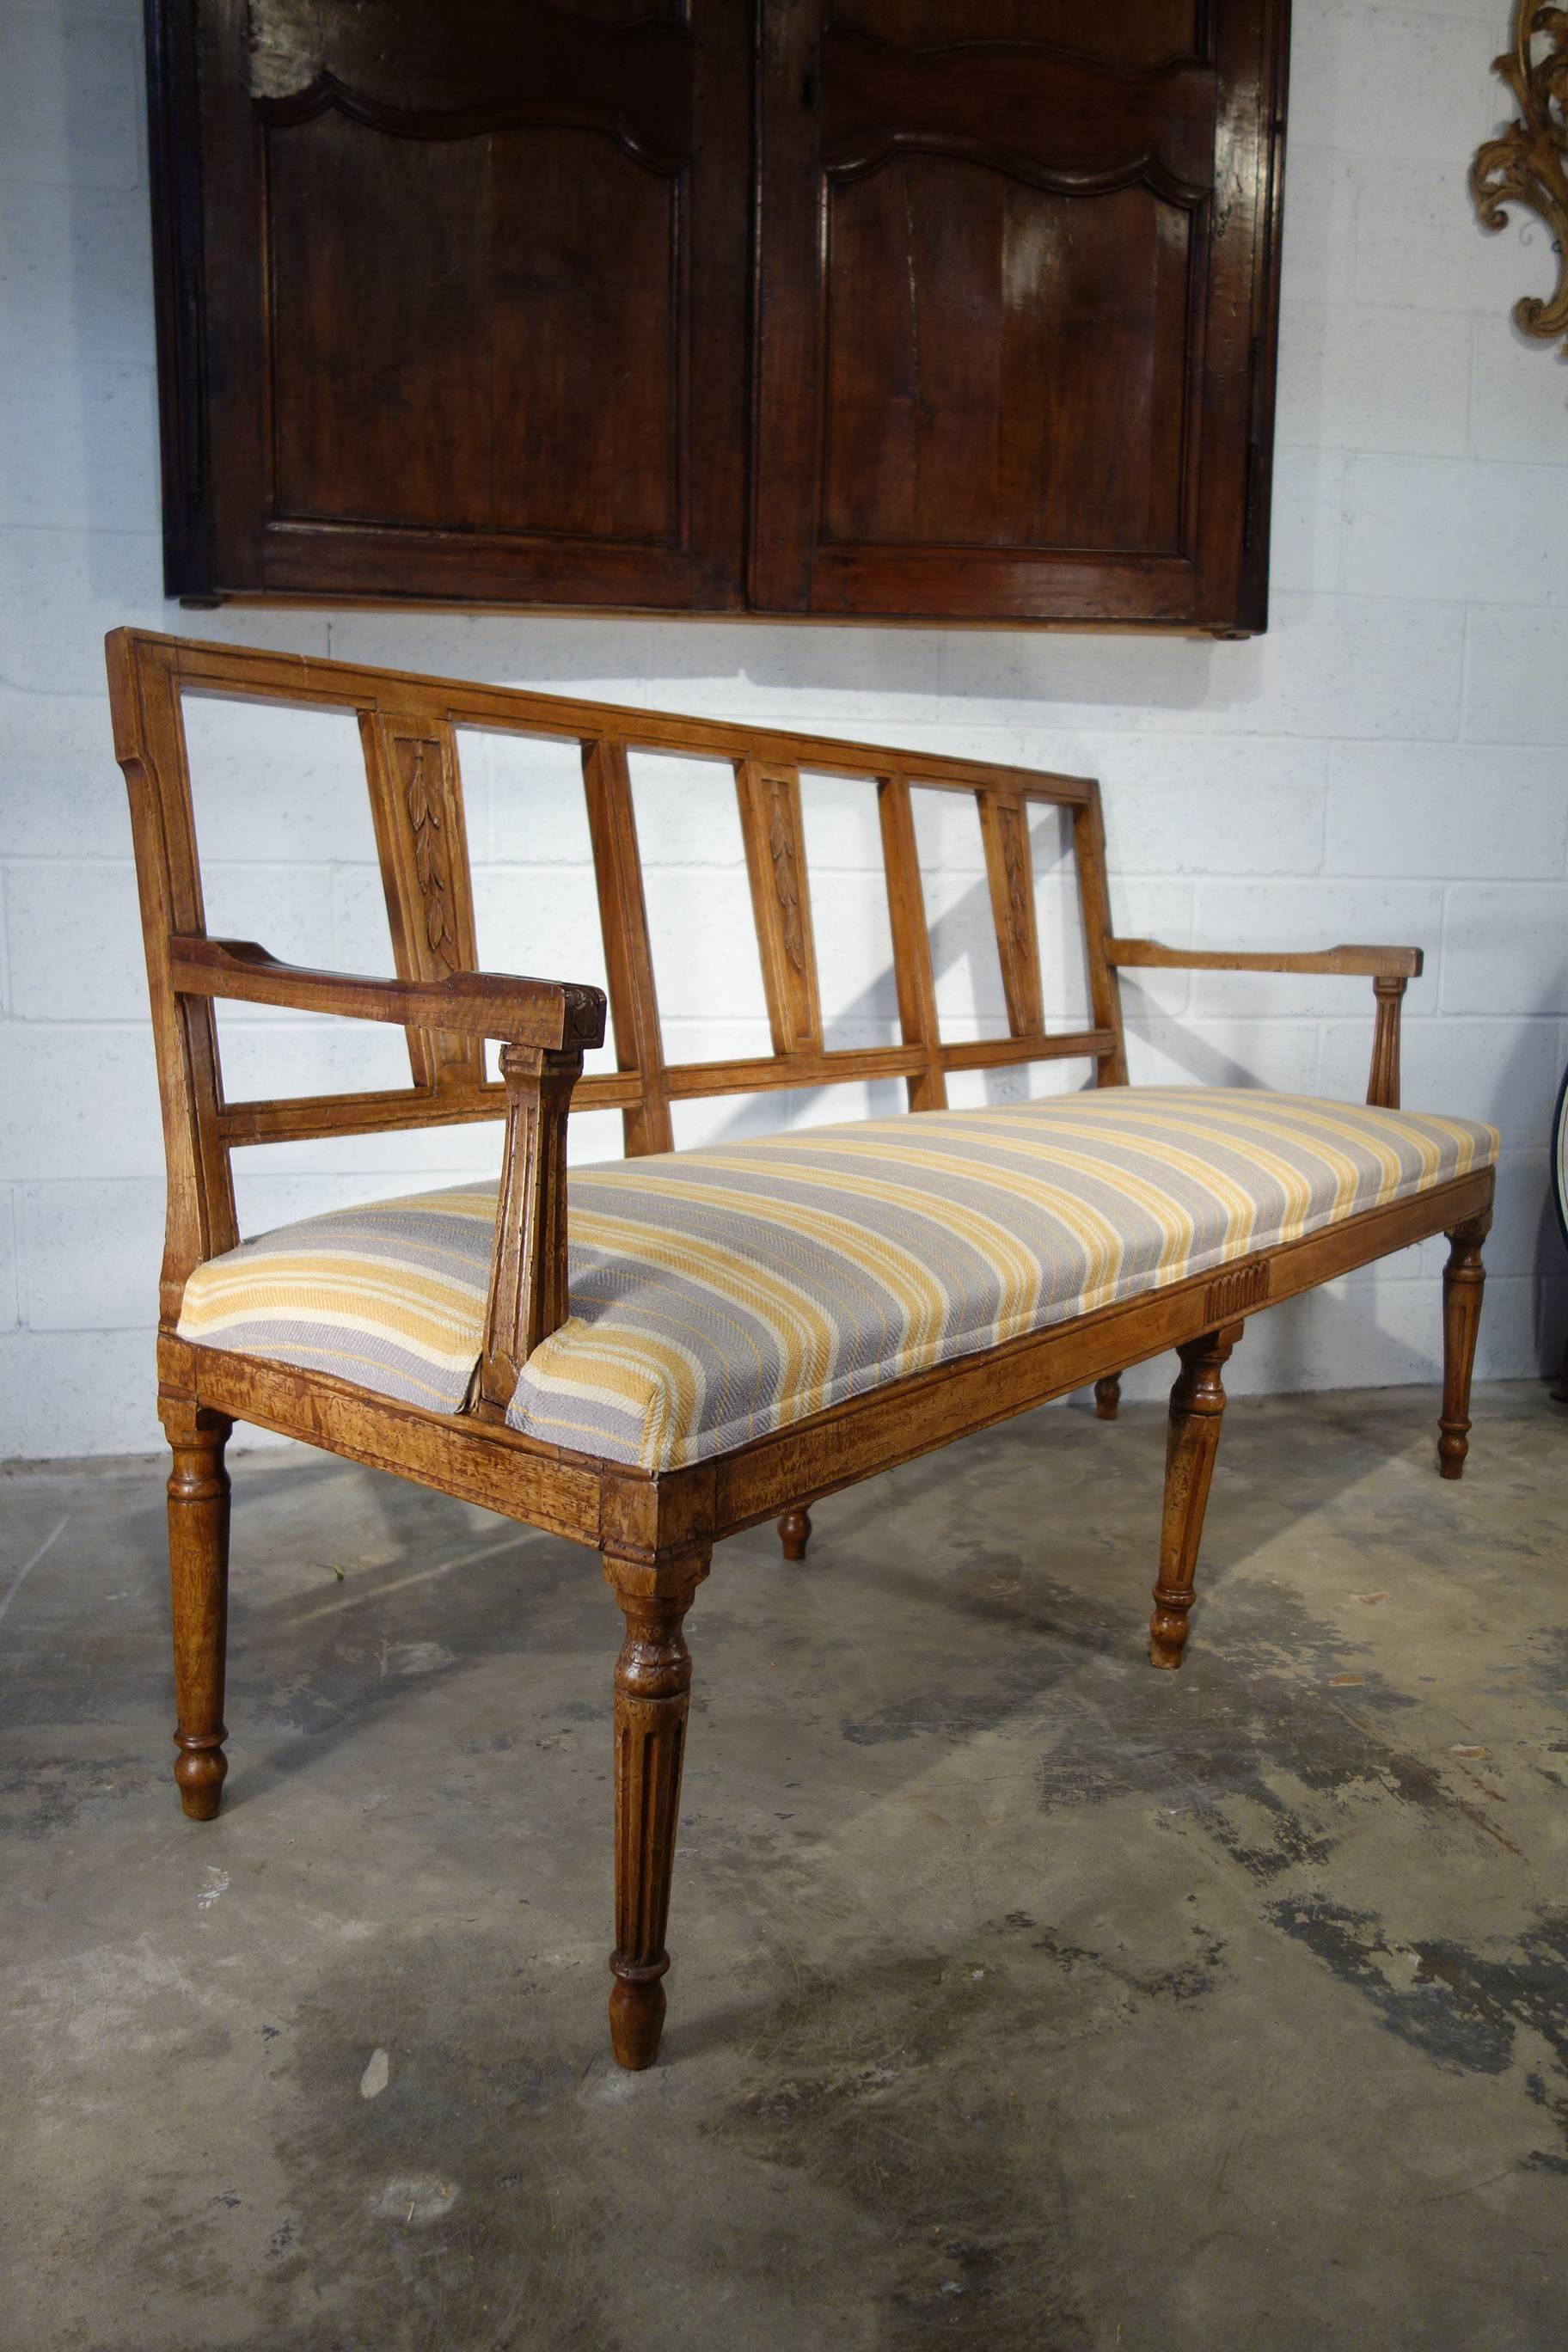 Elegant and stylish antique Italian Lombardy Louis XVI style three-seat and six-leg settee with bench cushion wrap style seat and open frame back; walnut solids with carved olive motif and scoring detail.